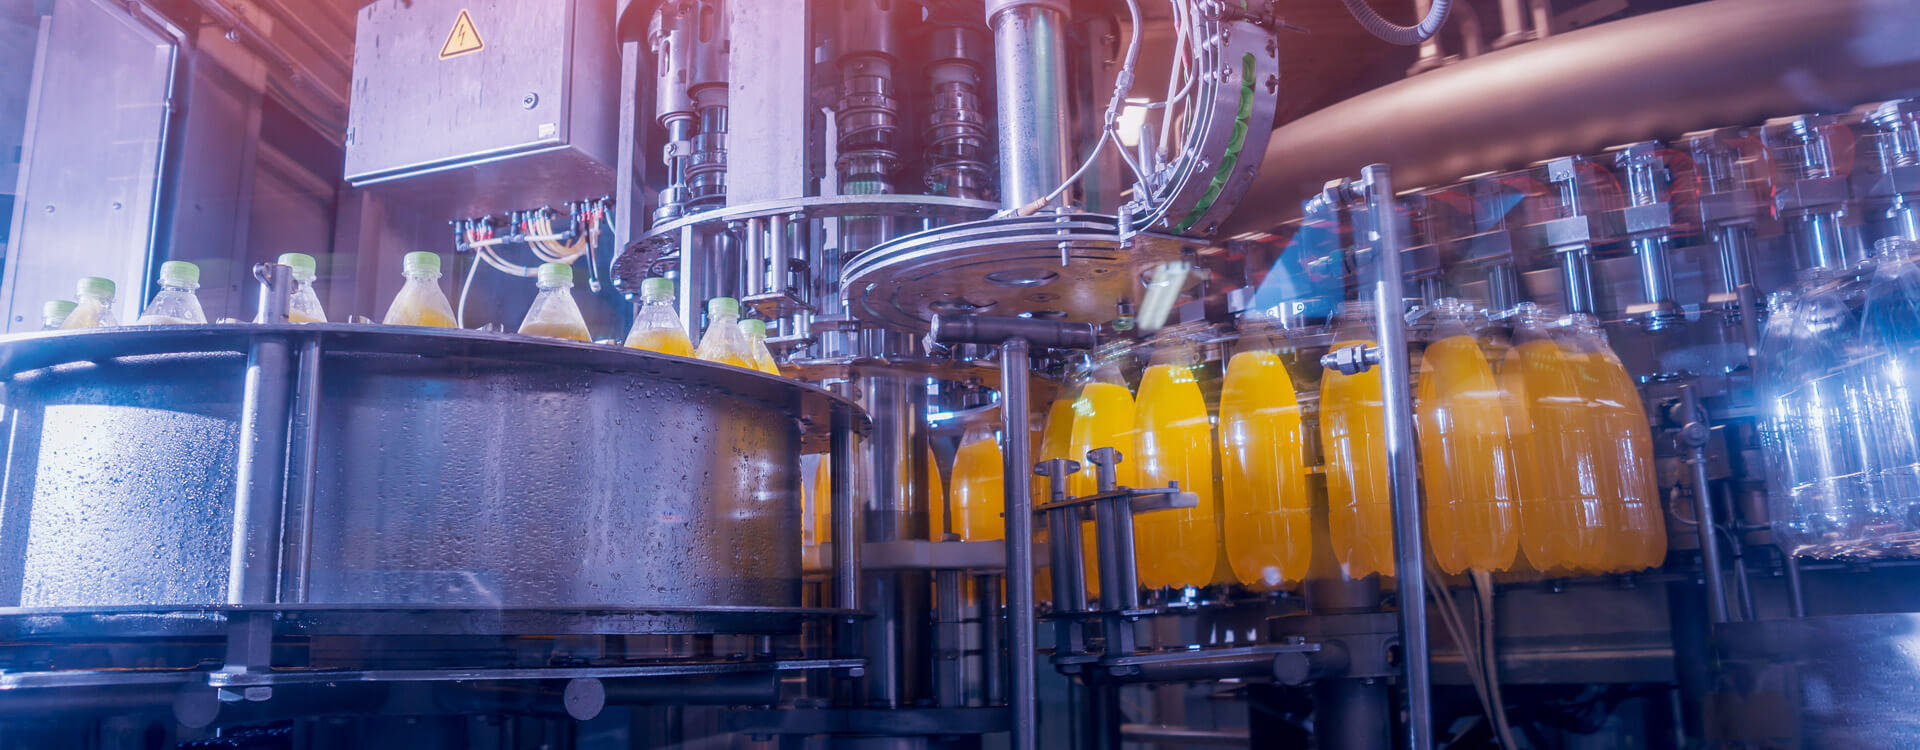 The bottles pass through a line of beverage production and filling machines and are filled with orange drinks